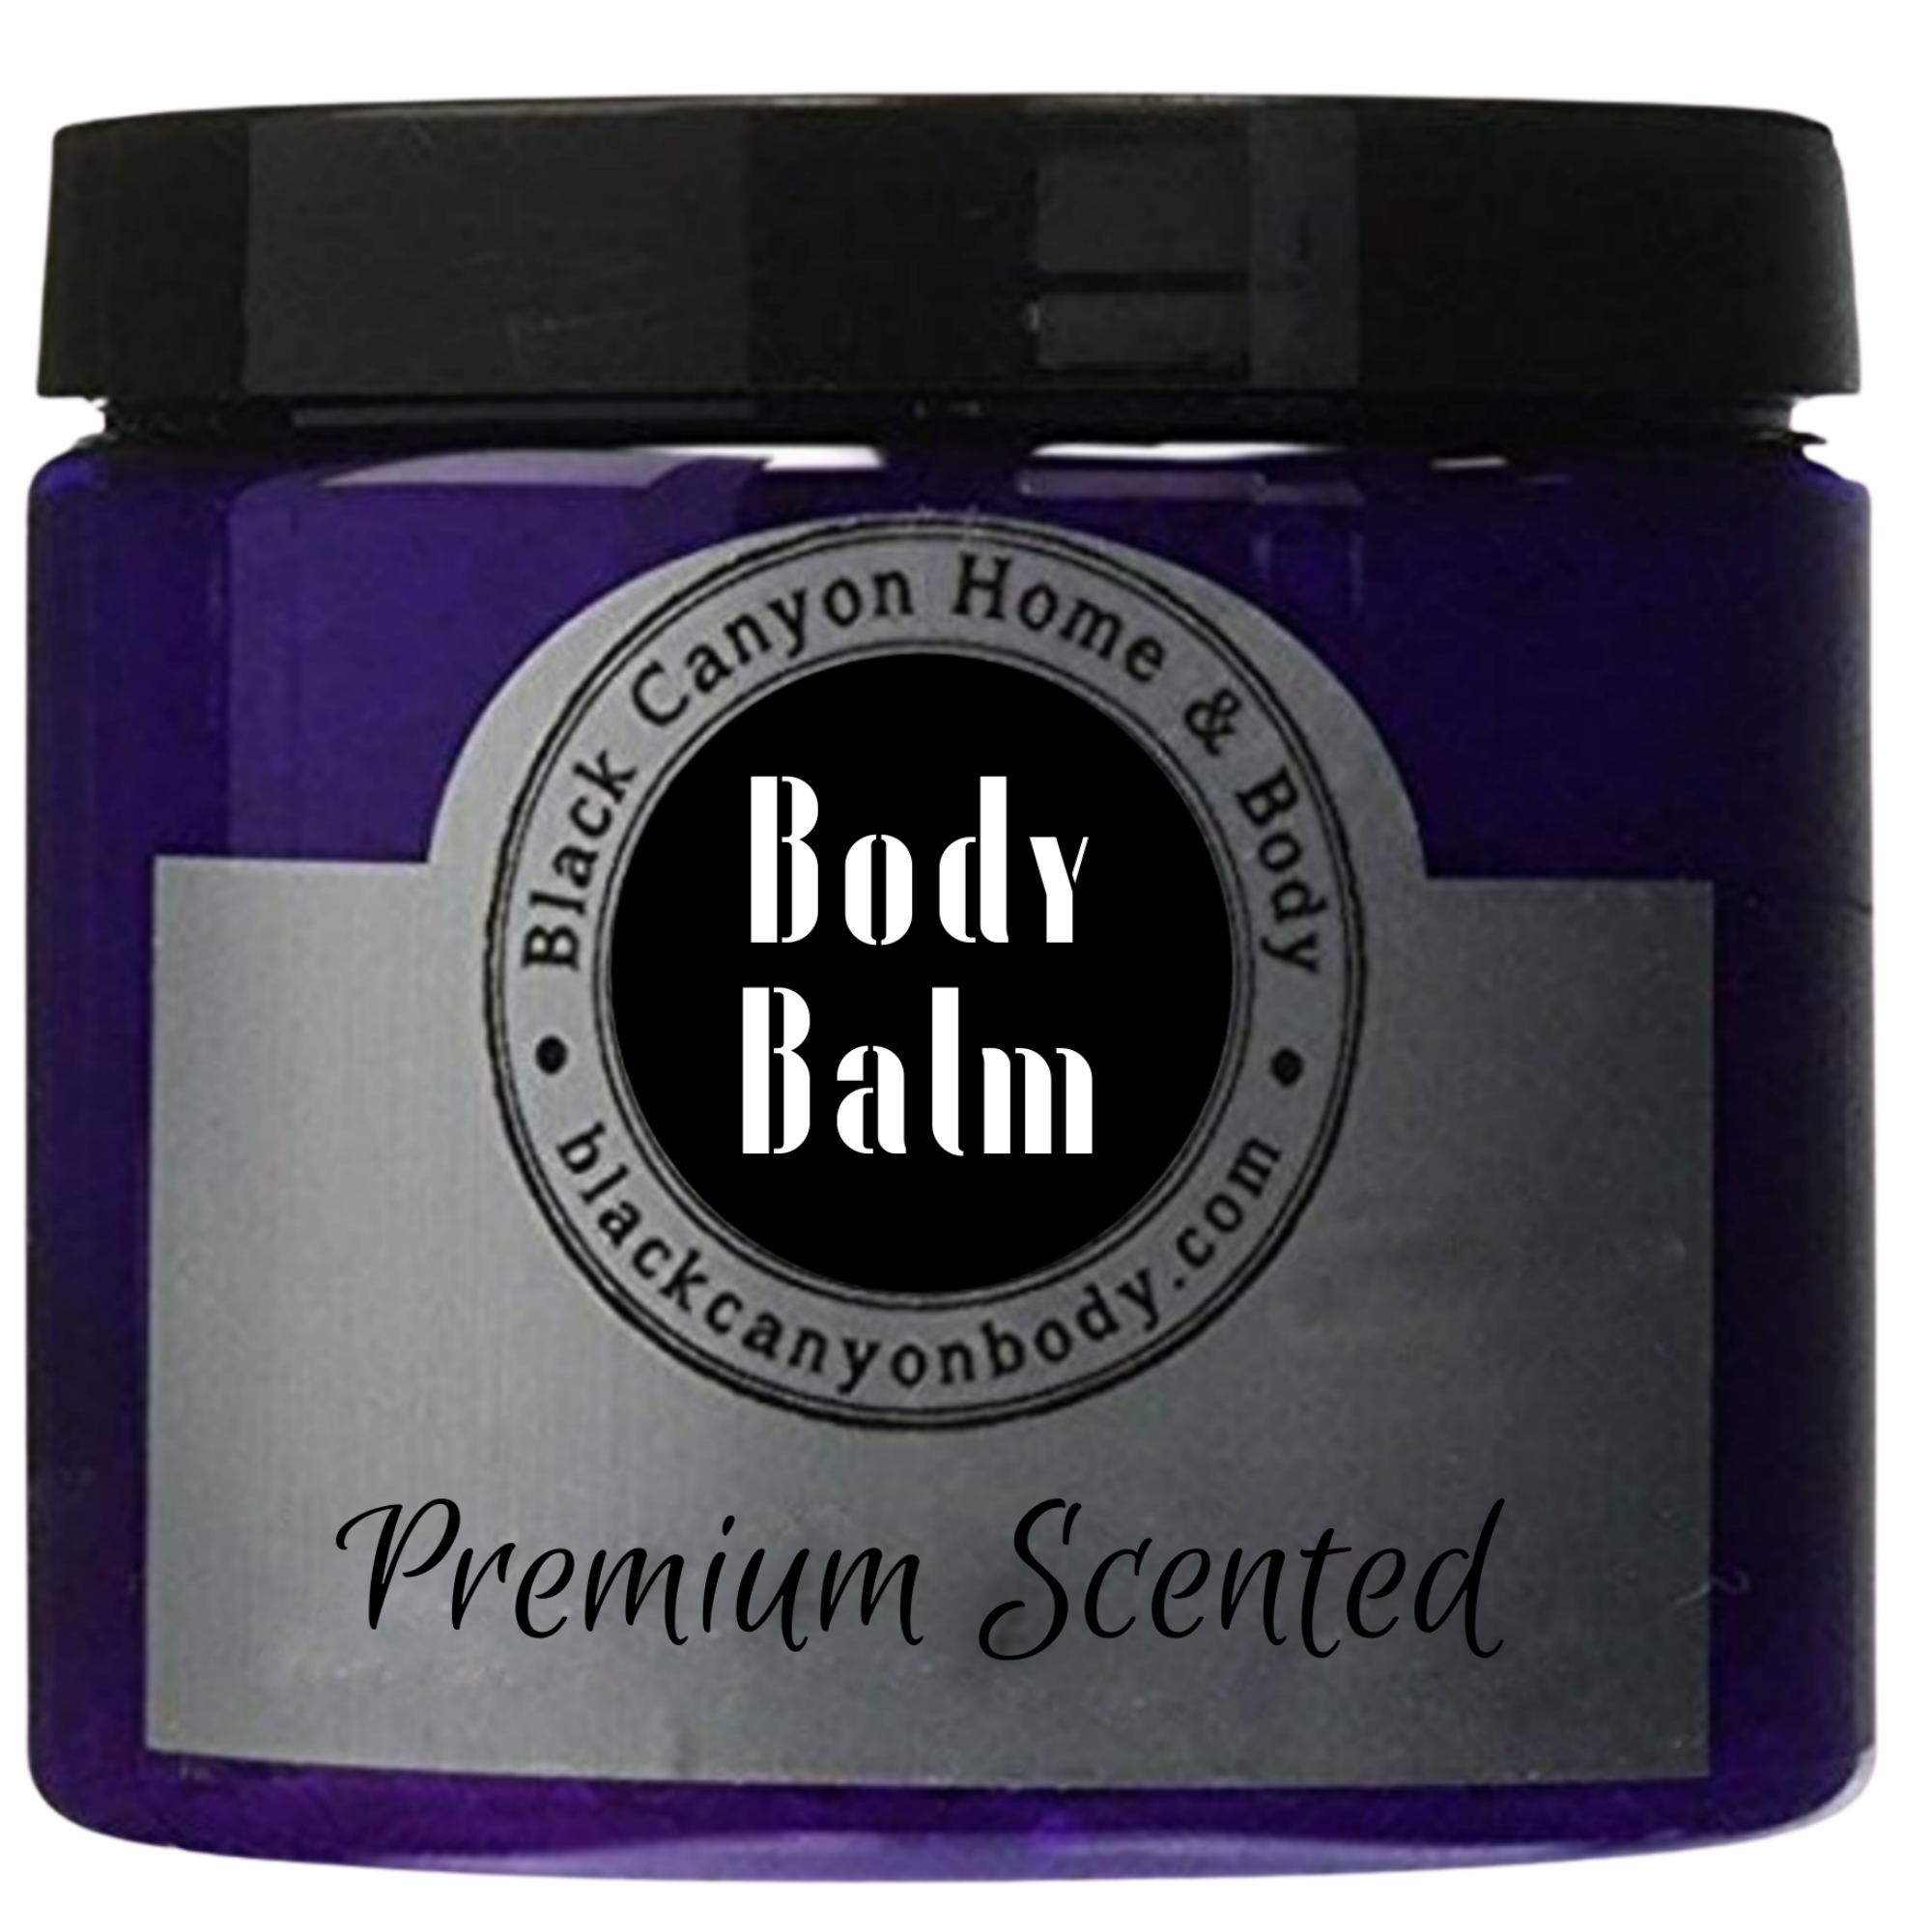 Paydens Cobalt Bergamot Fig & Leather Scented Natural Body Balm with Shea For Men